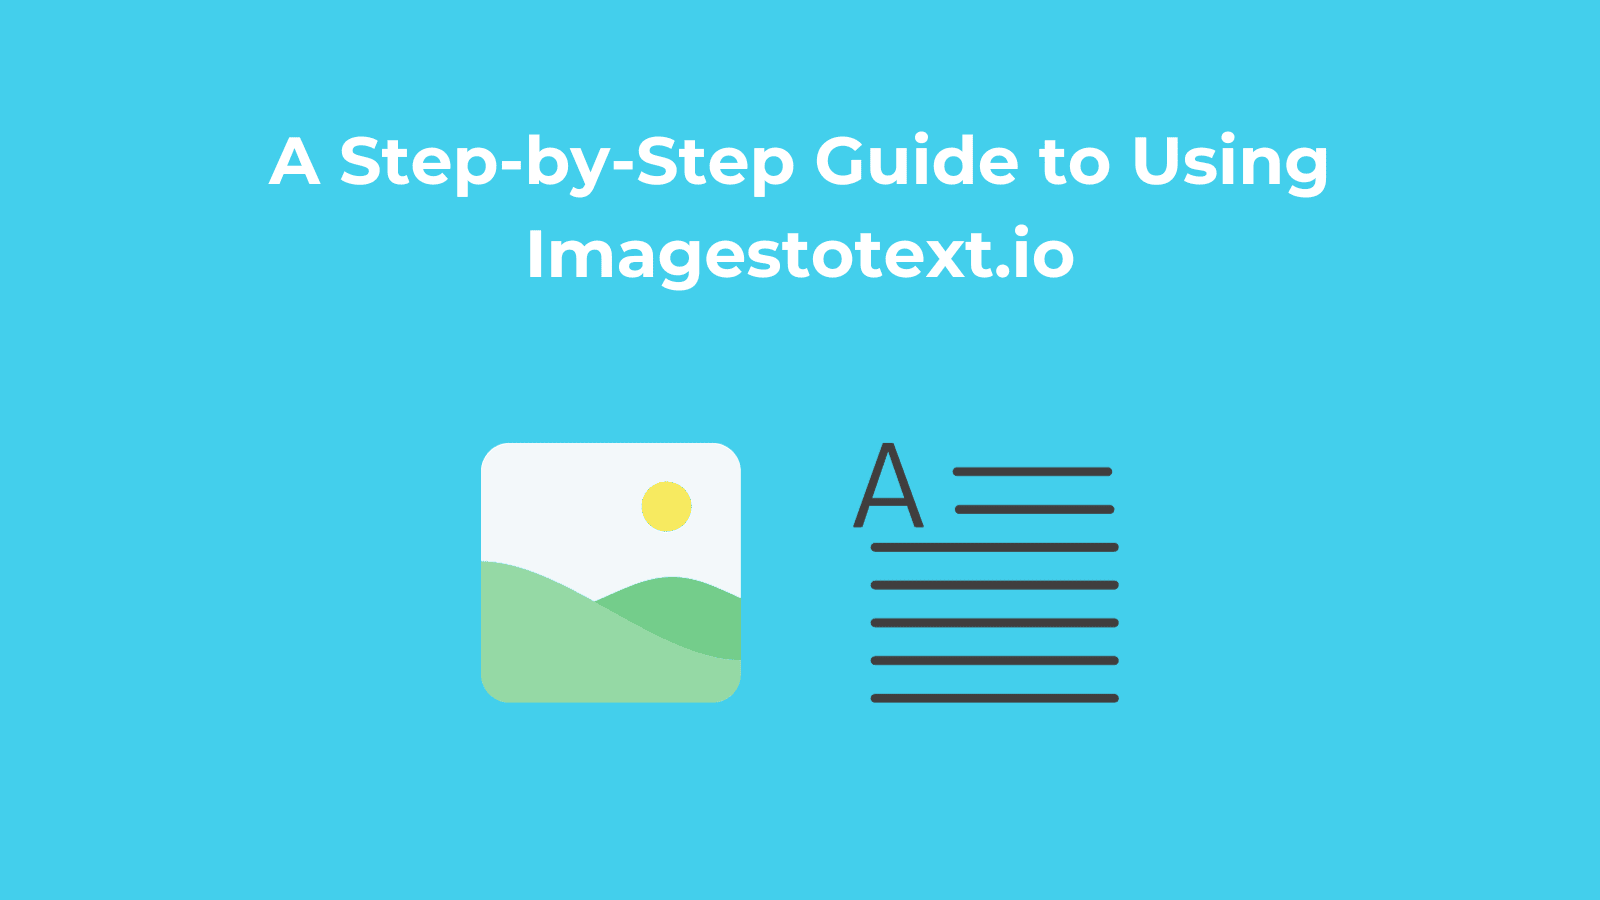 A Step-by-Step Guide to Using Imagestotext.io